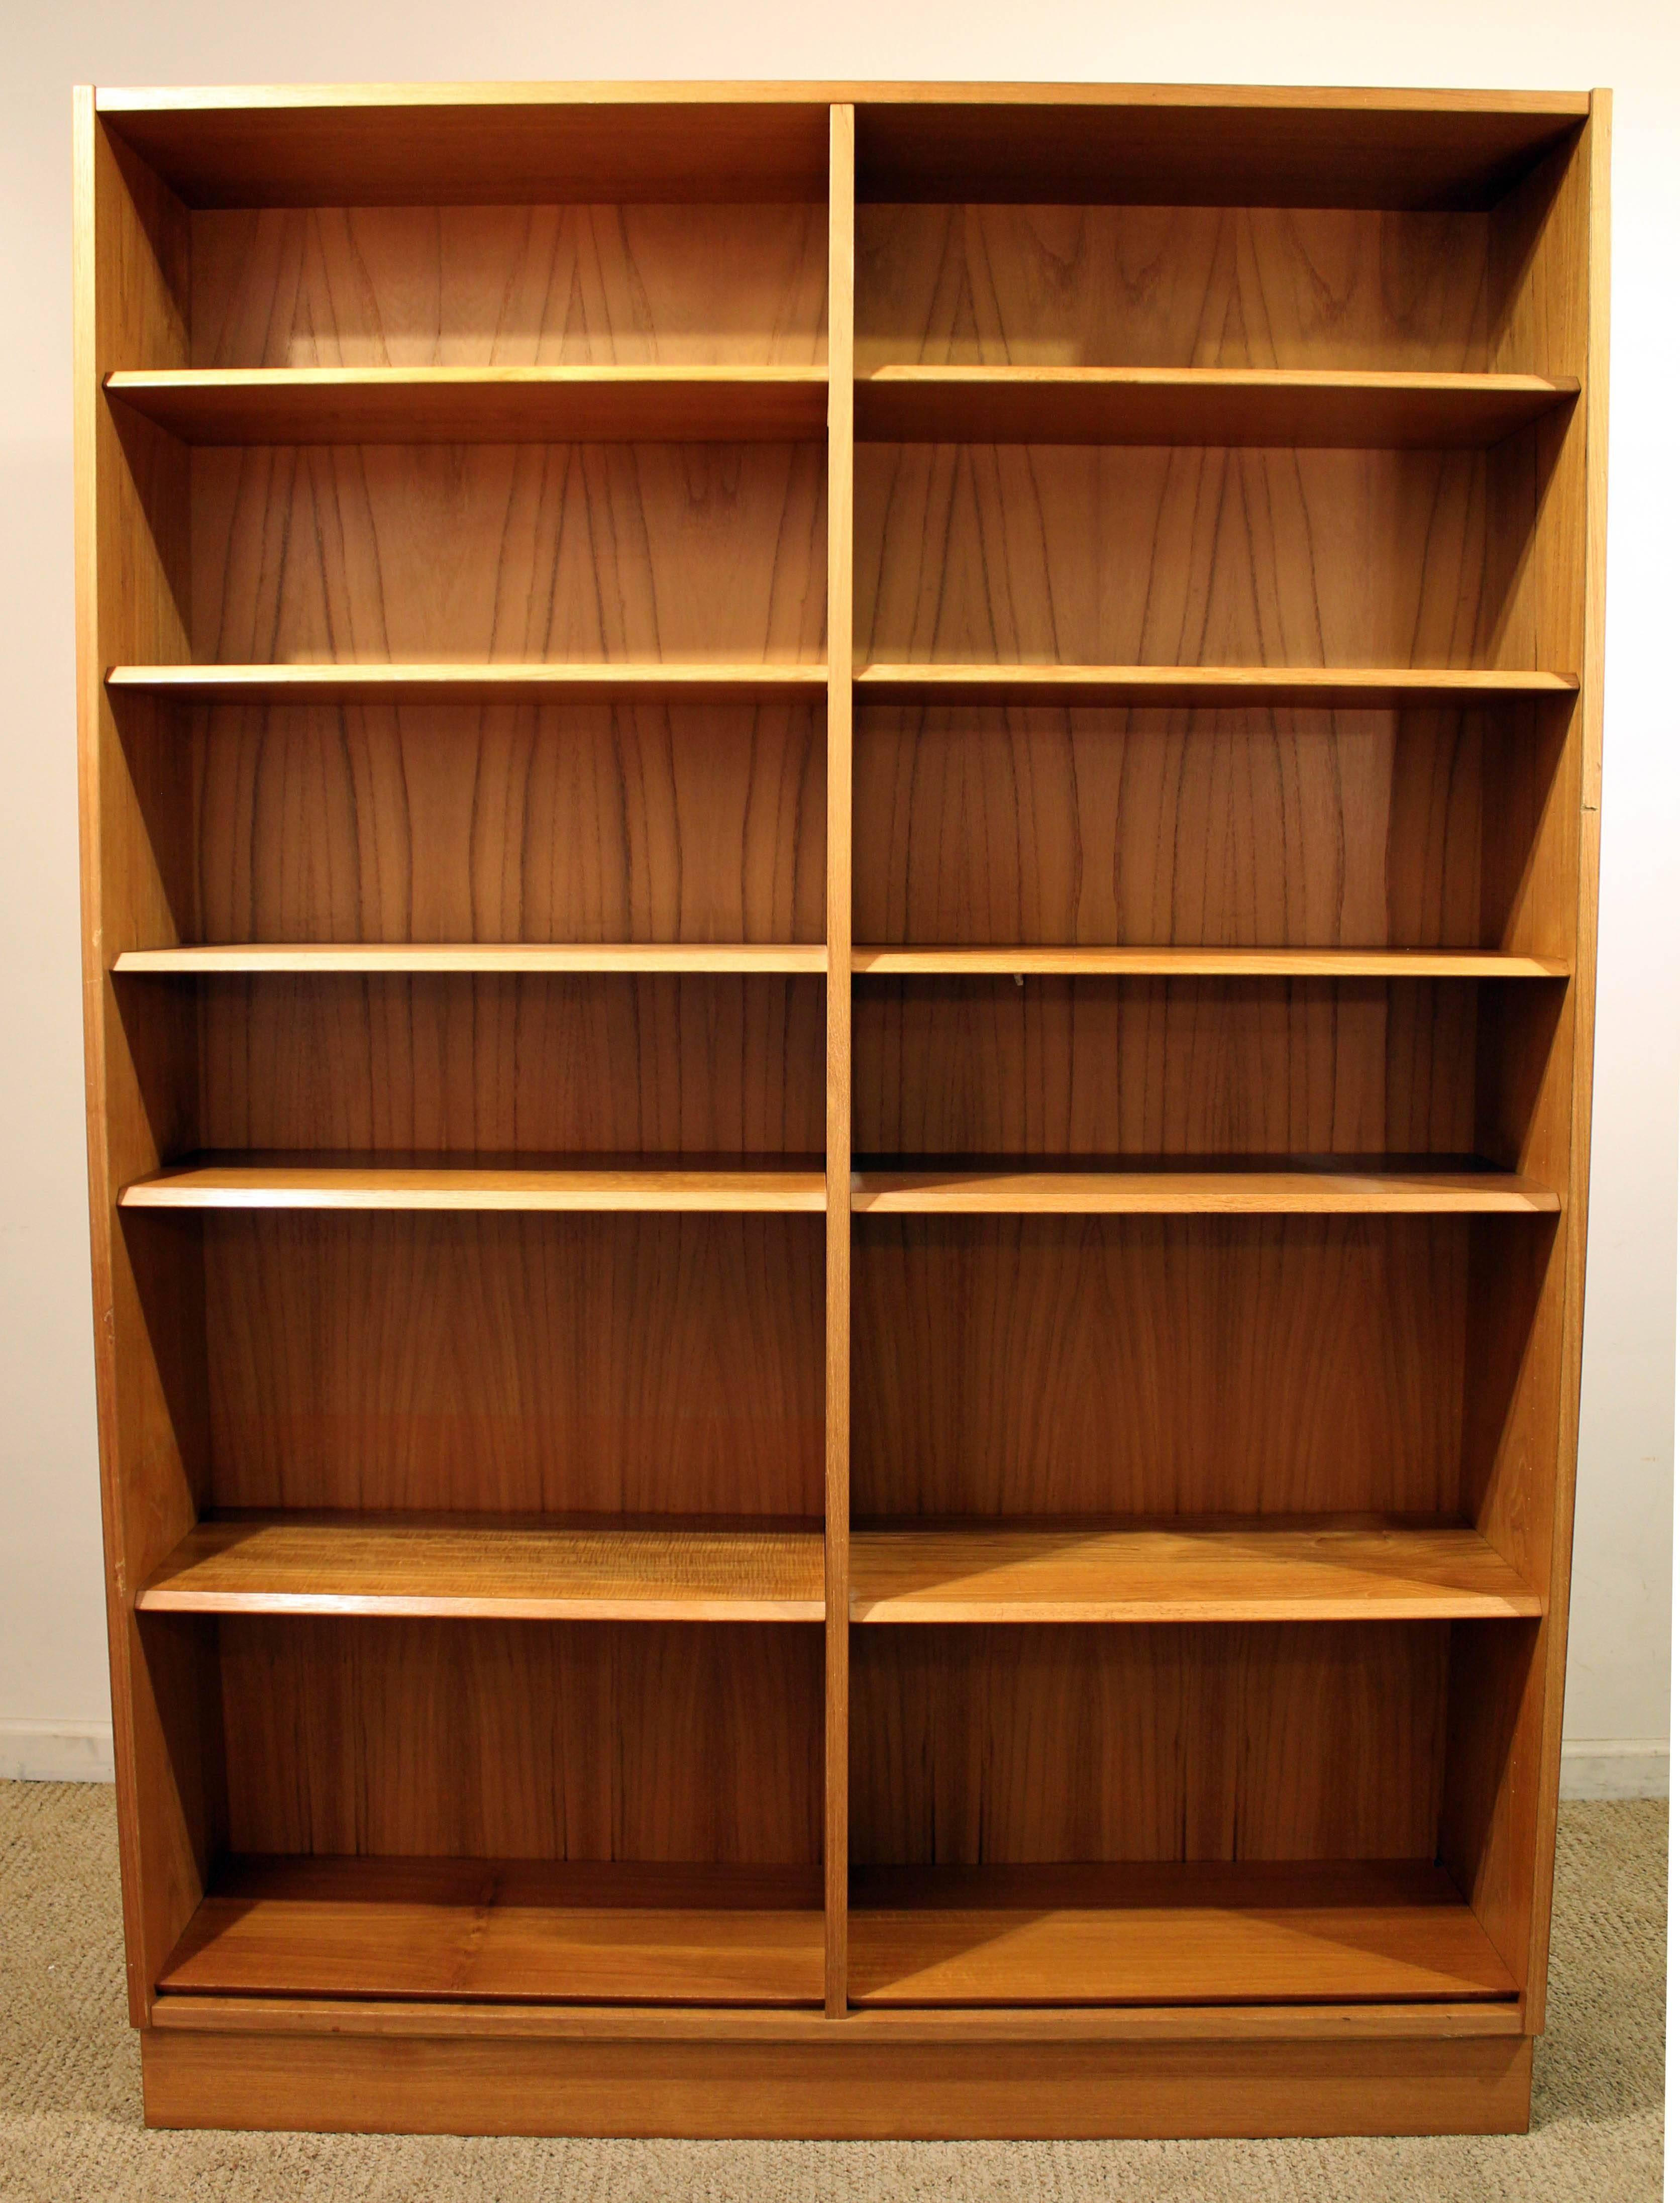 Offered is a piece of time and design: a teak double bookcase designed by Poul Hundevad. Includes twelve adjustable shelves, two are missing pins.

Dimensions:
54.5